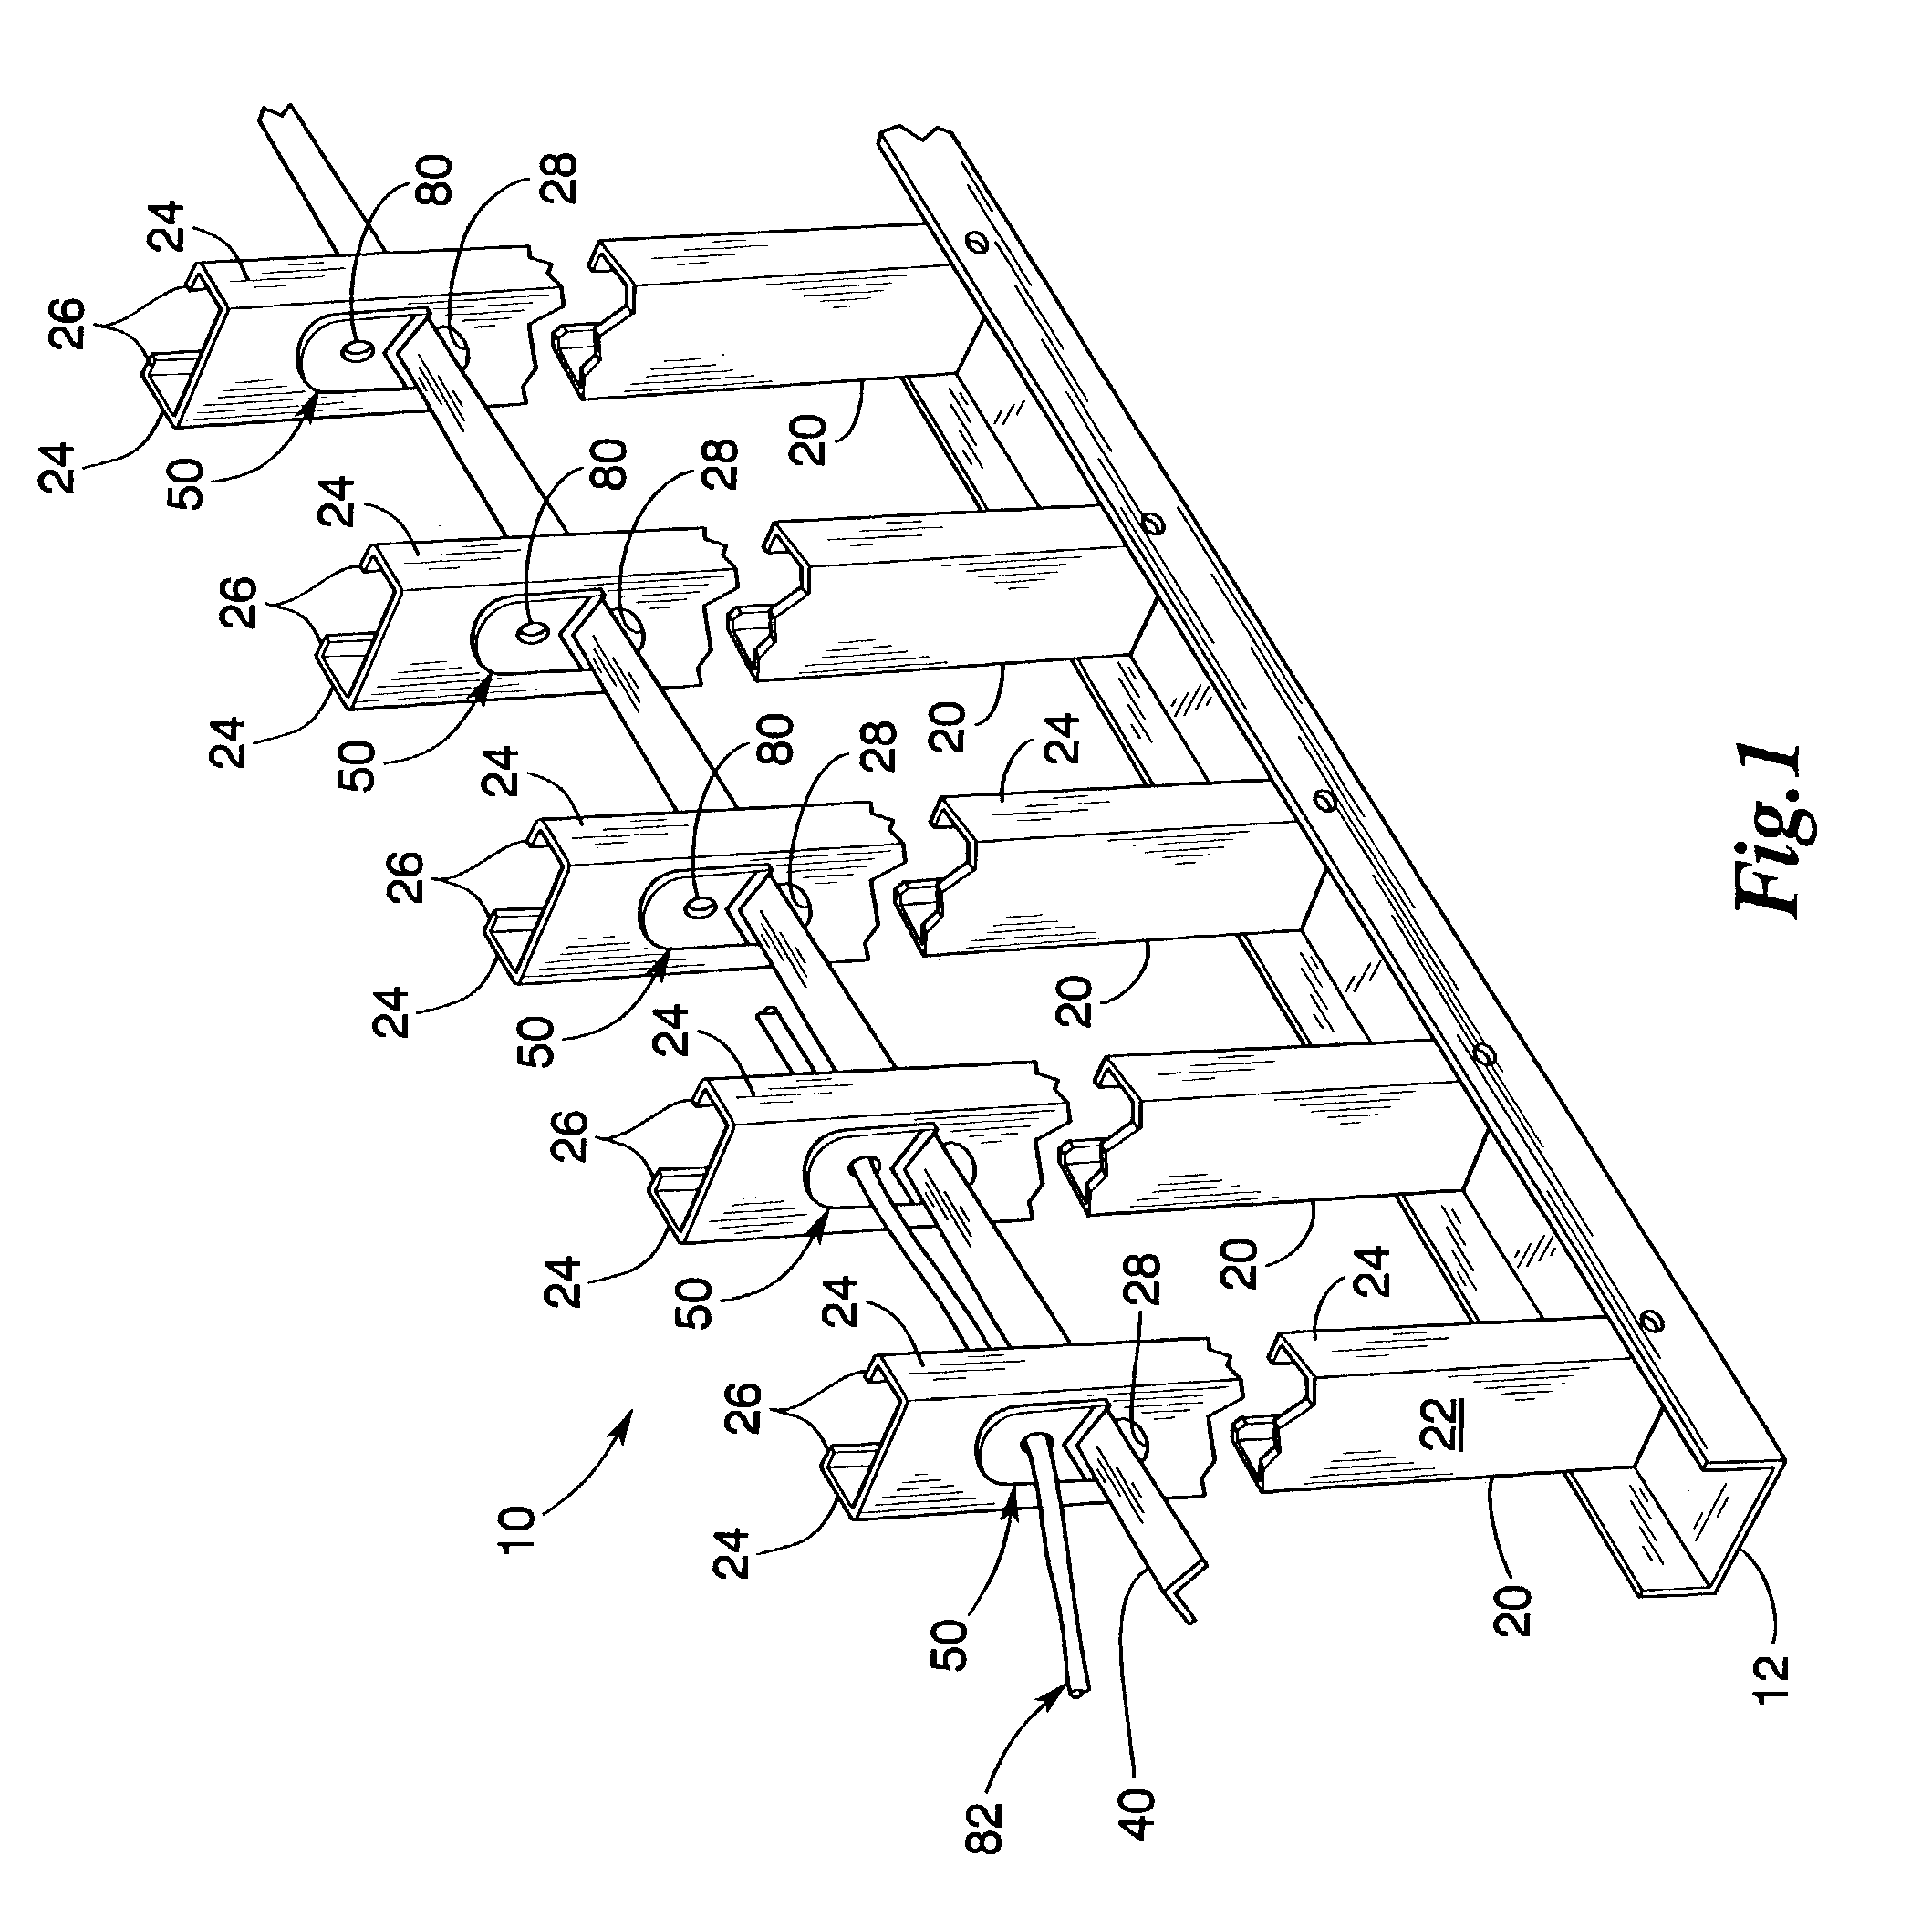 Spacer bar retainers and methods for retaining spacer bars in metal wall studs